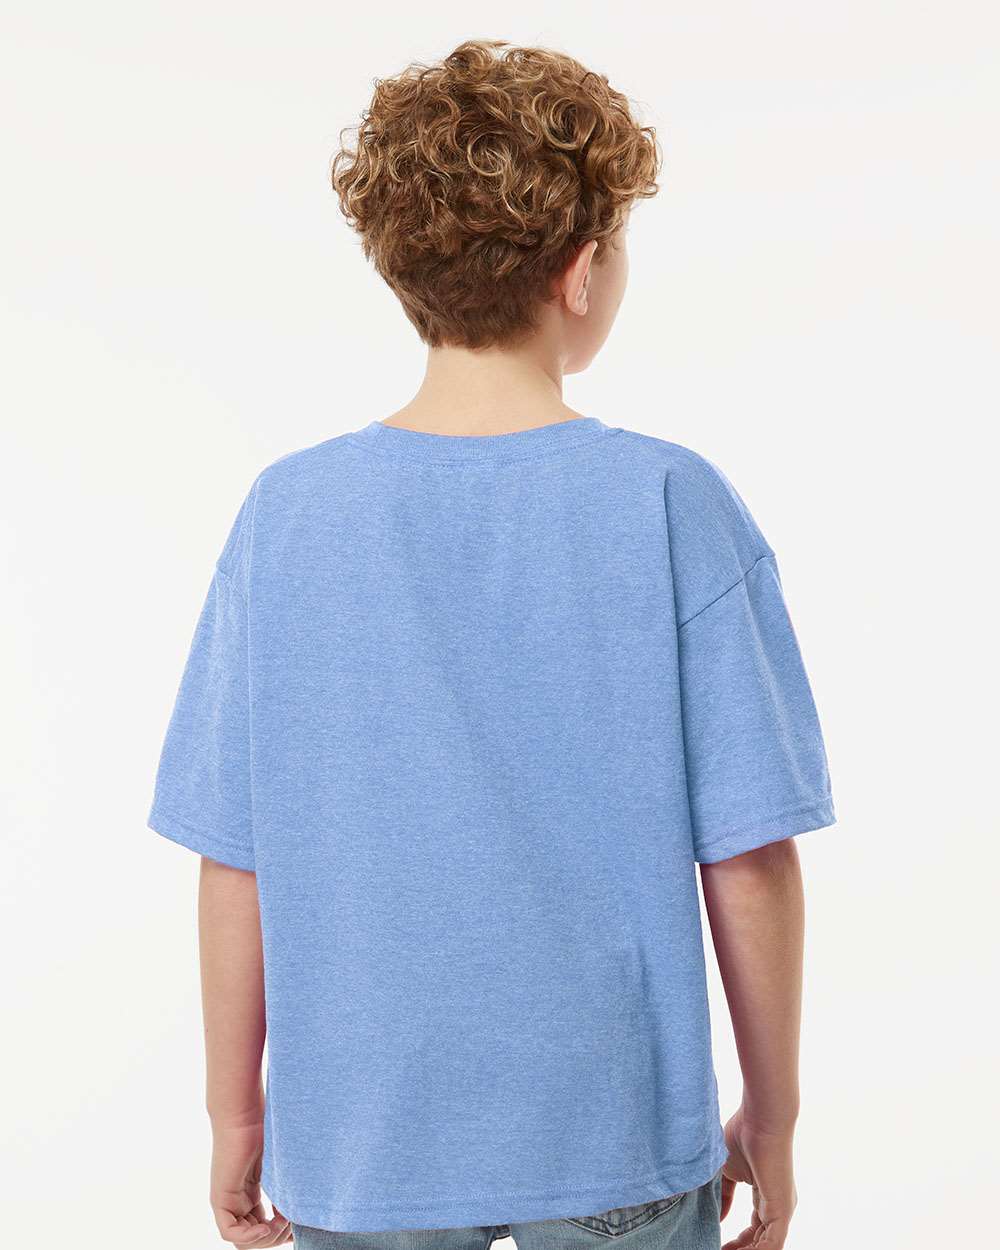 M&O Youth Gold Soft Touch T-Shirt 4850 #colormdl_Light Blue Heather